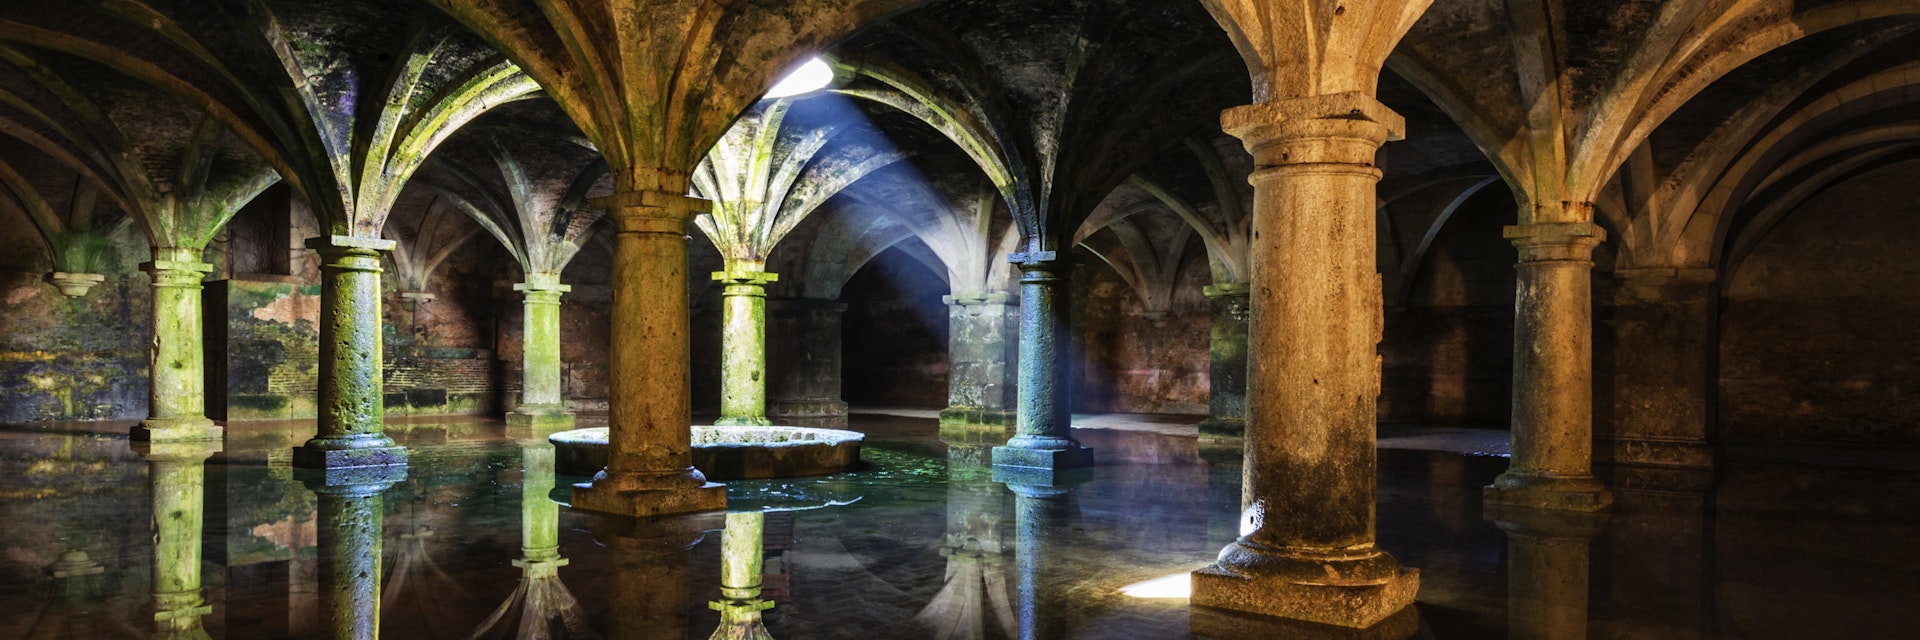 Ornate tile arches illuminated near skylight reflecting in water